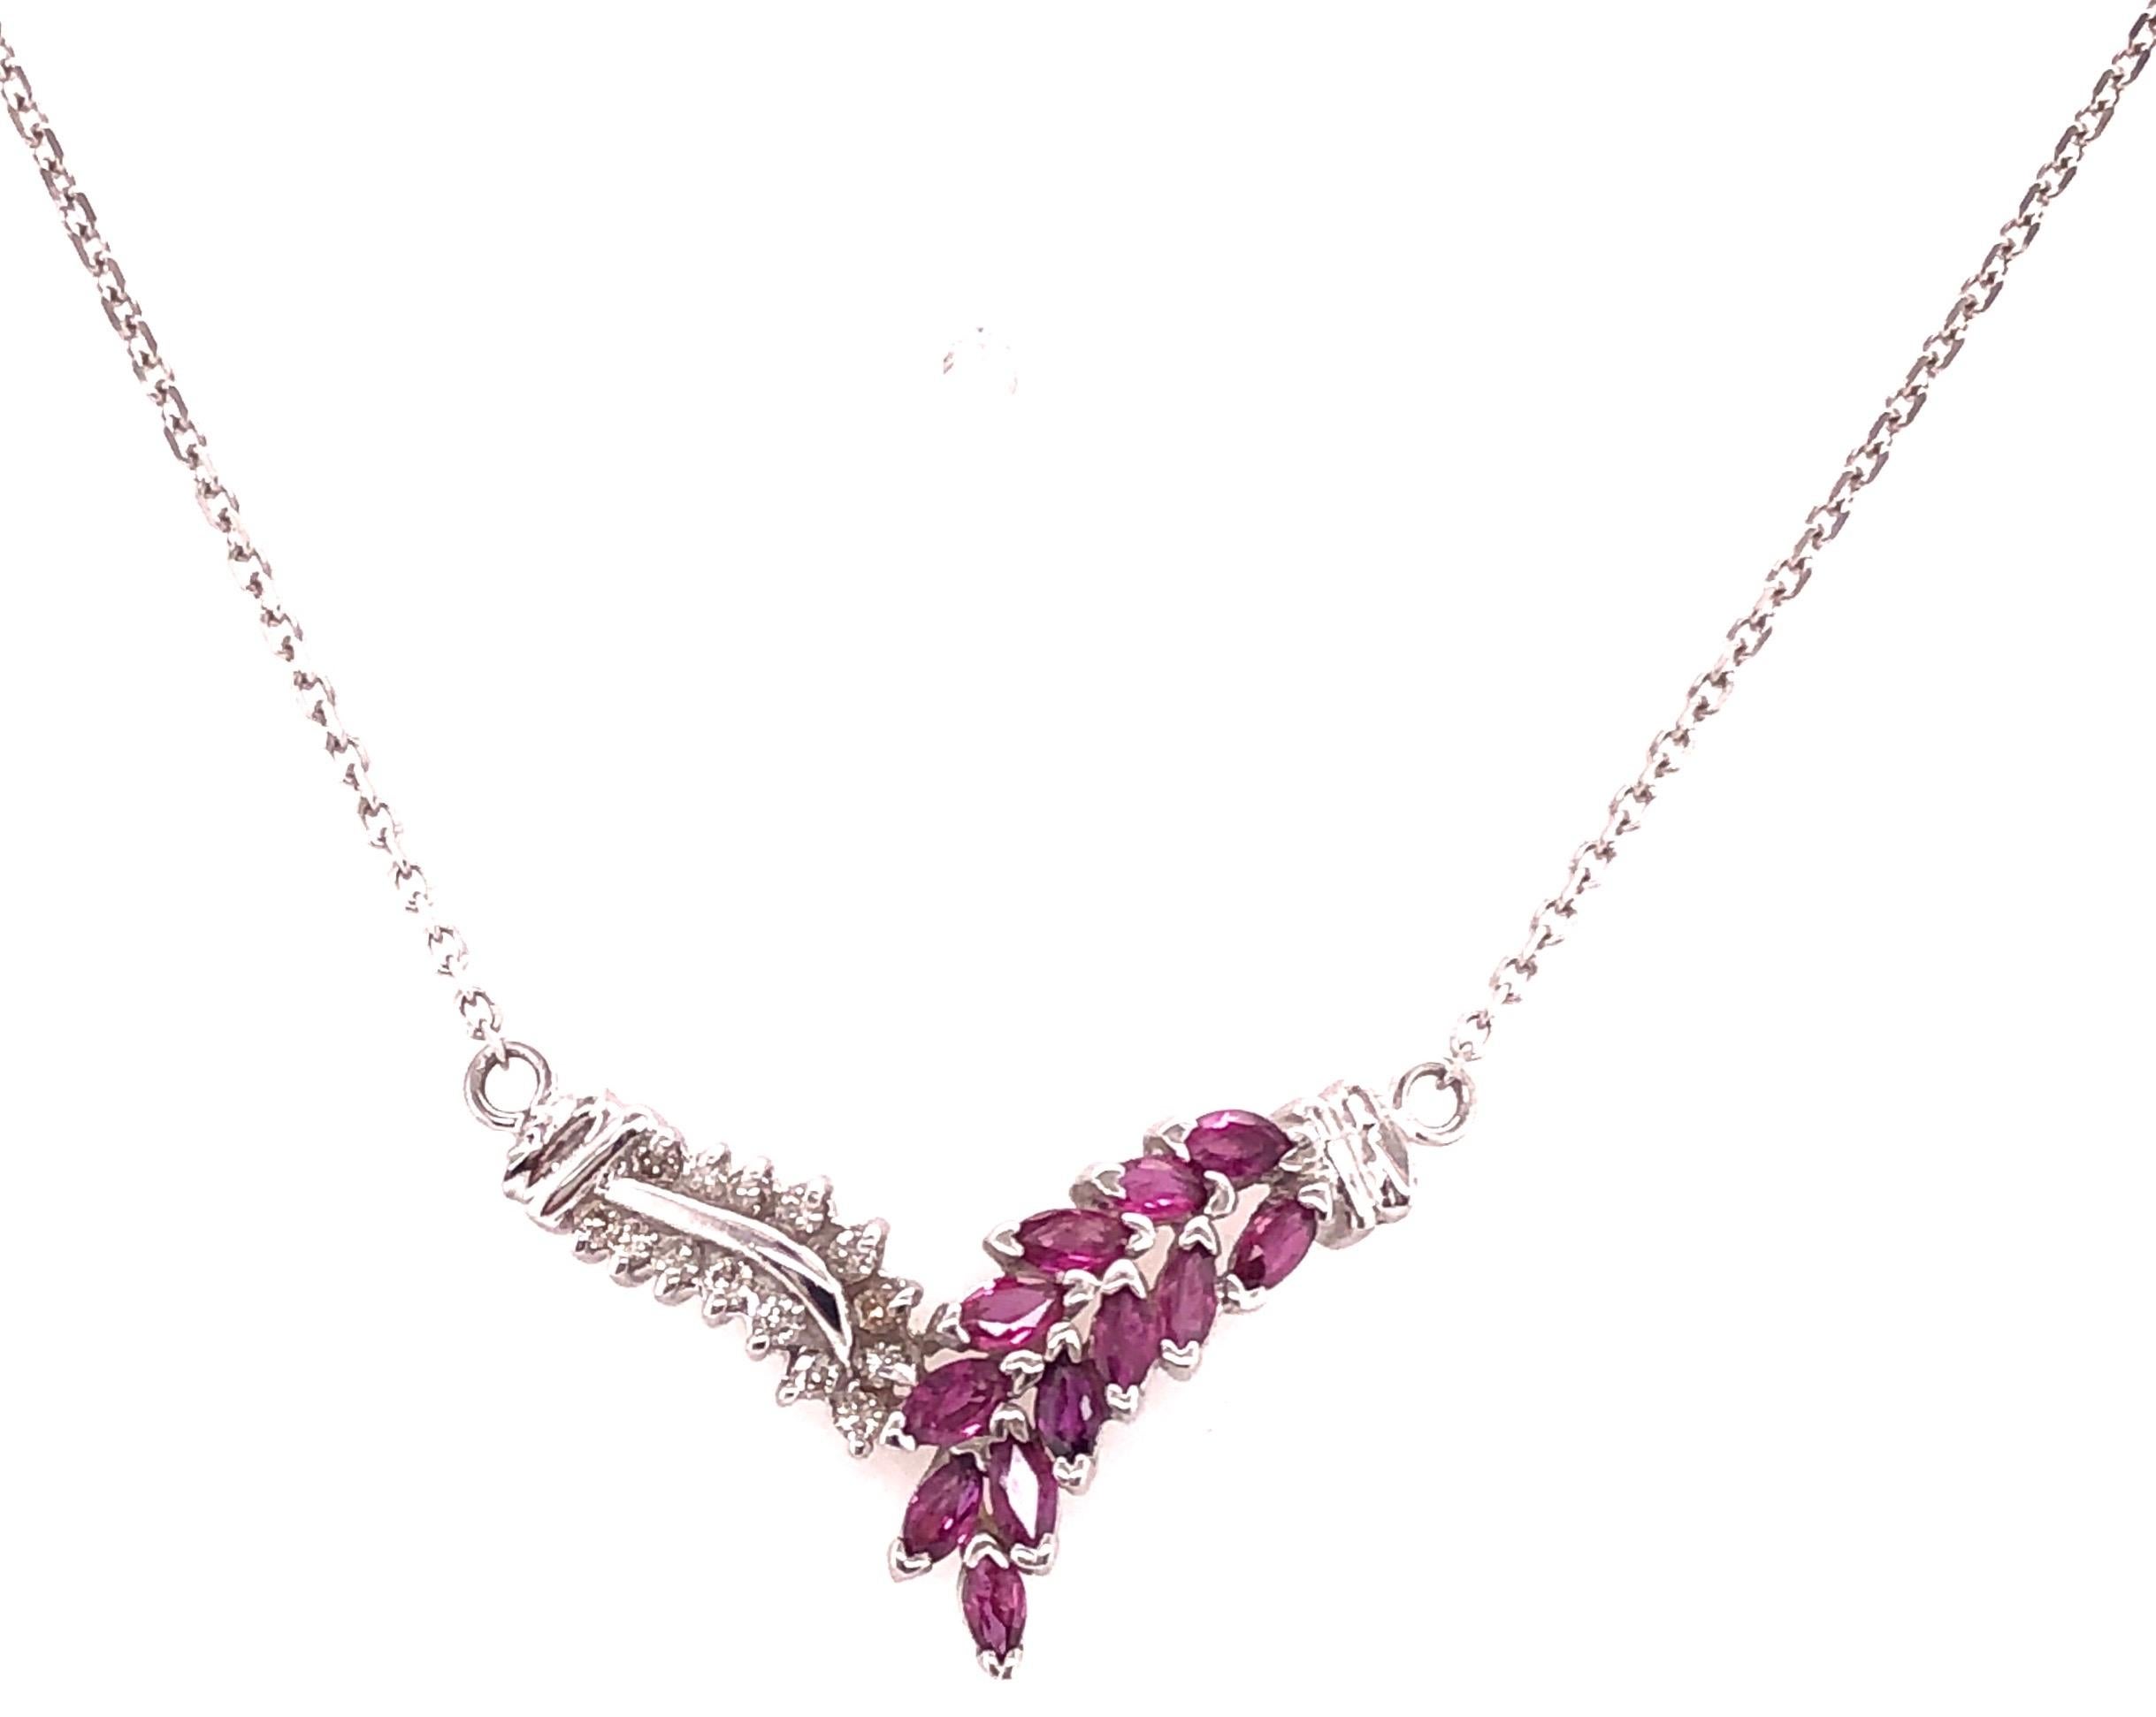 14 Kt White Gold 19 inch Fashion Necklace with Pendant of Diamonds and Semi Precious Stones 
Pendant: 3 cm width
                2 cm height
5.7 grams total weight.
